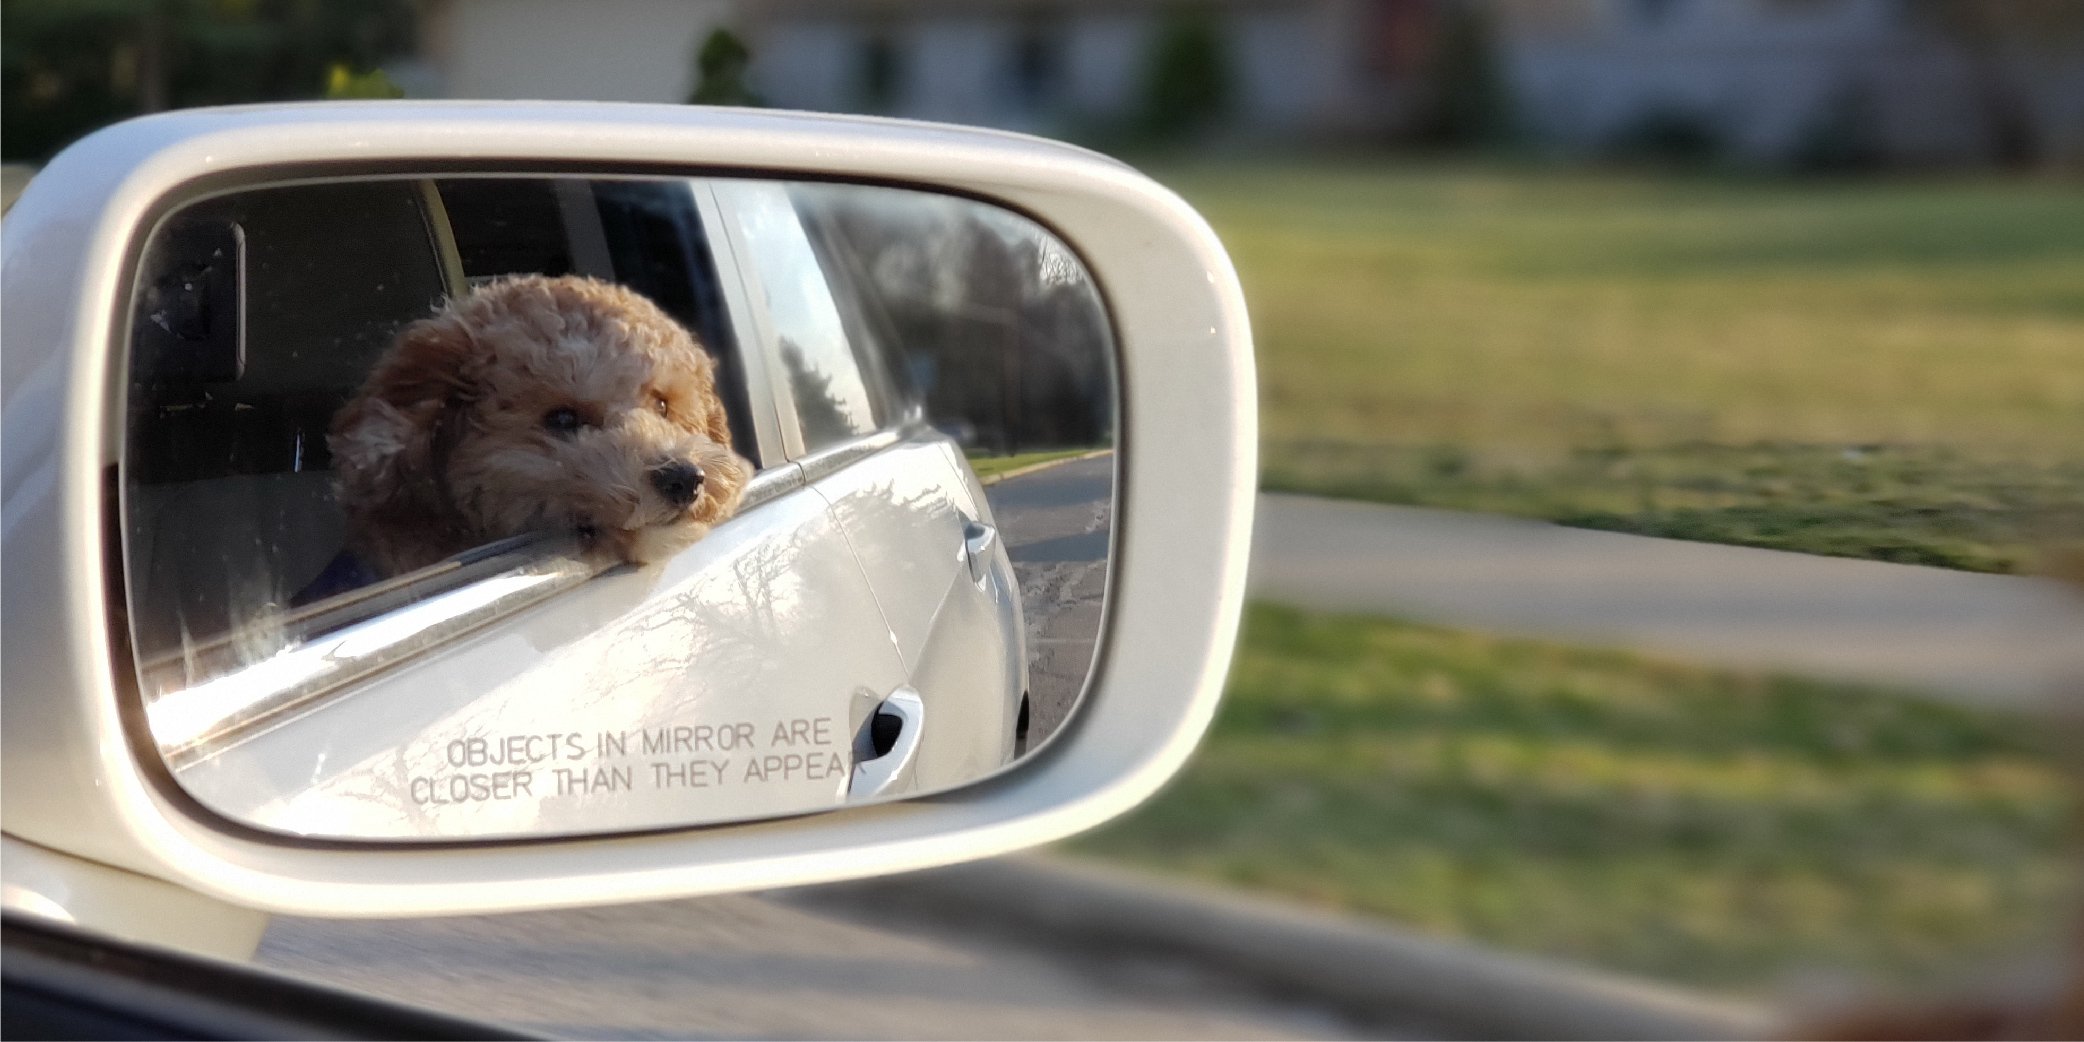 What Do Dogs See in Mirrors? - Scientific American Blog Network